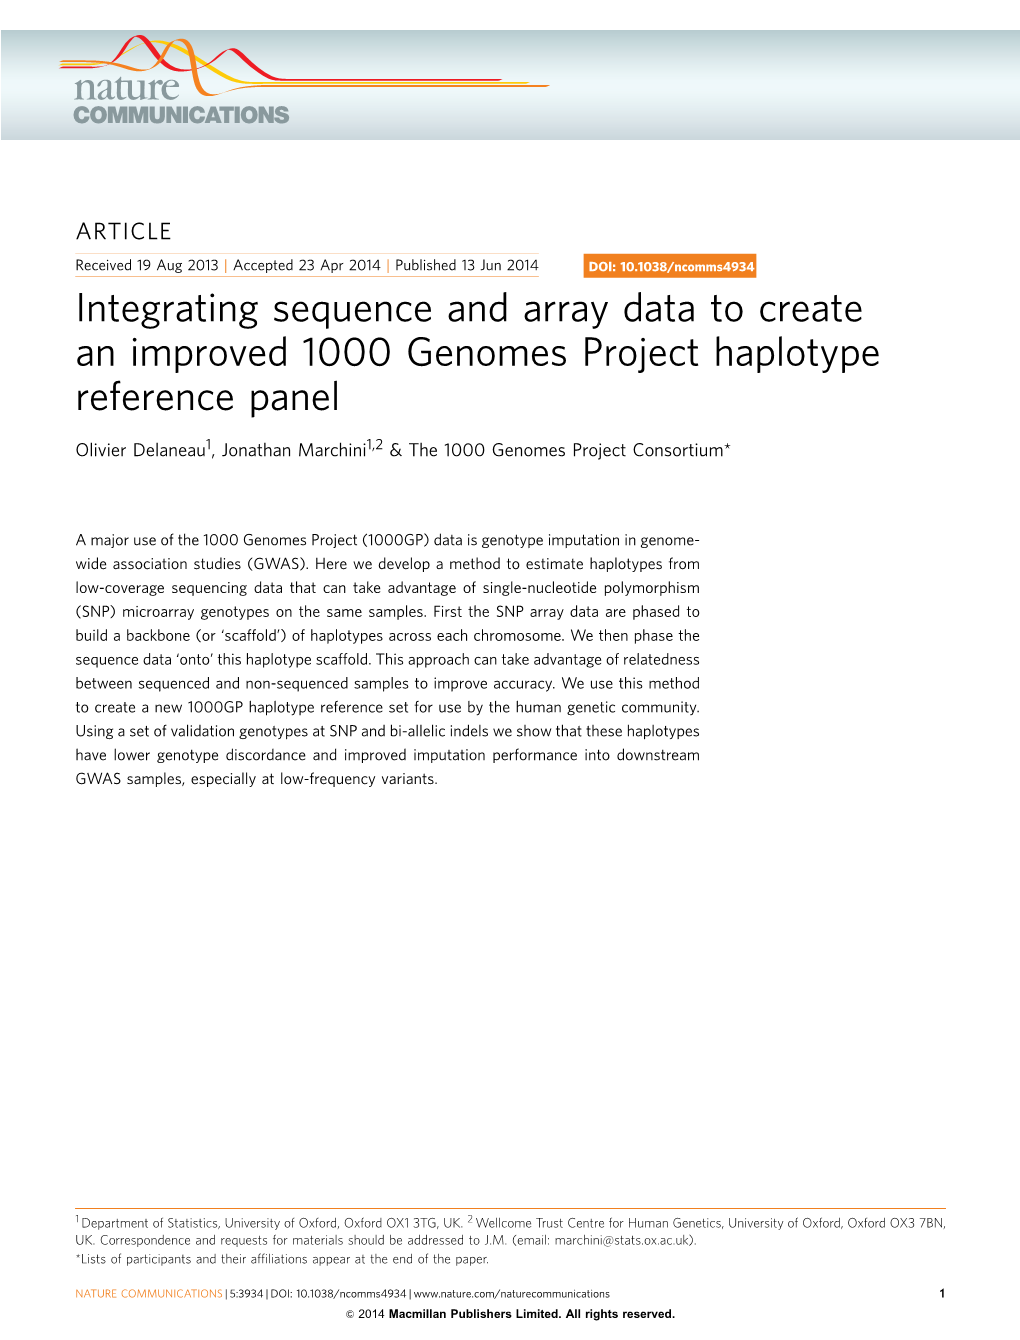 Integrating Sequence and Array Data to Create an Improved 1000 Genomes Project Haplotype Reference Panel